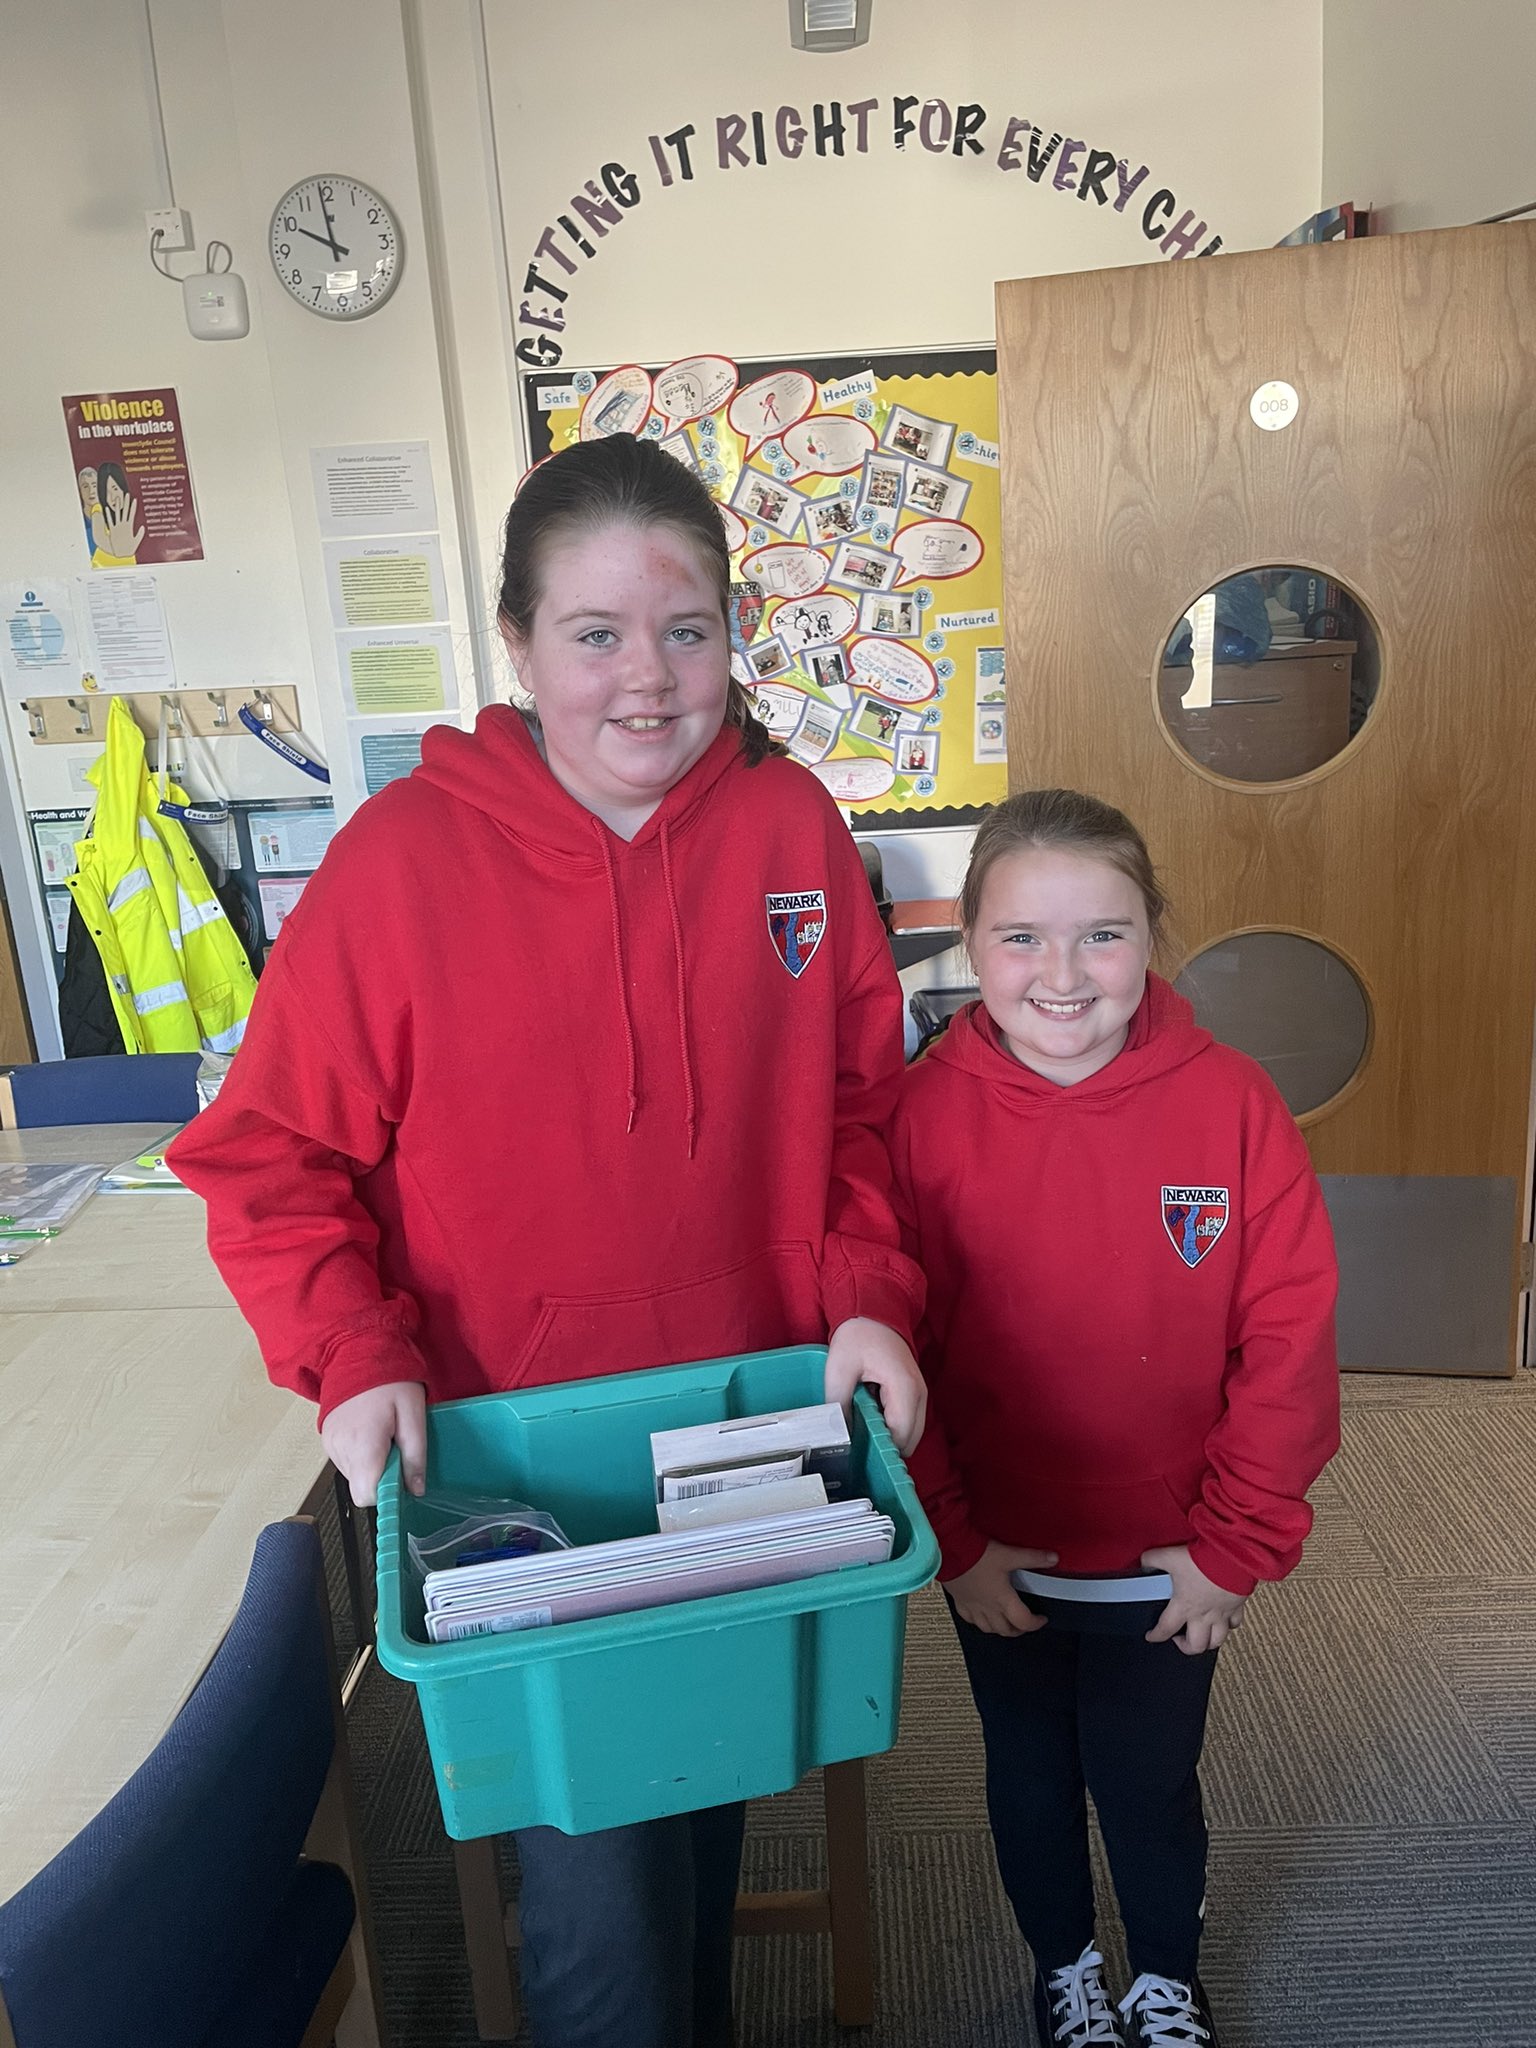 2 young people in red school uniform sweatshirts hold a box of dyslexia-friendly resources